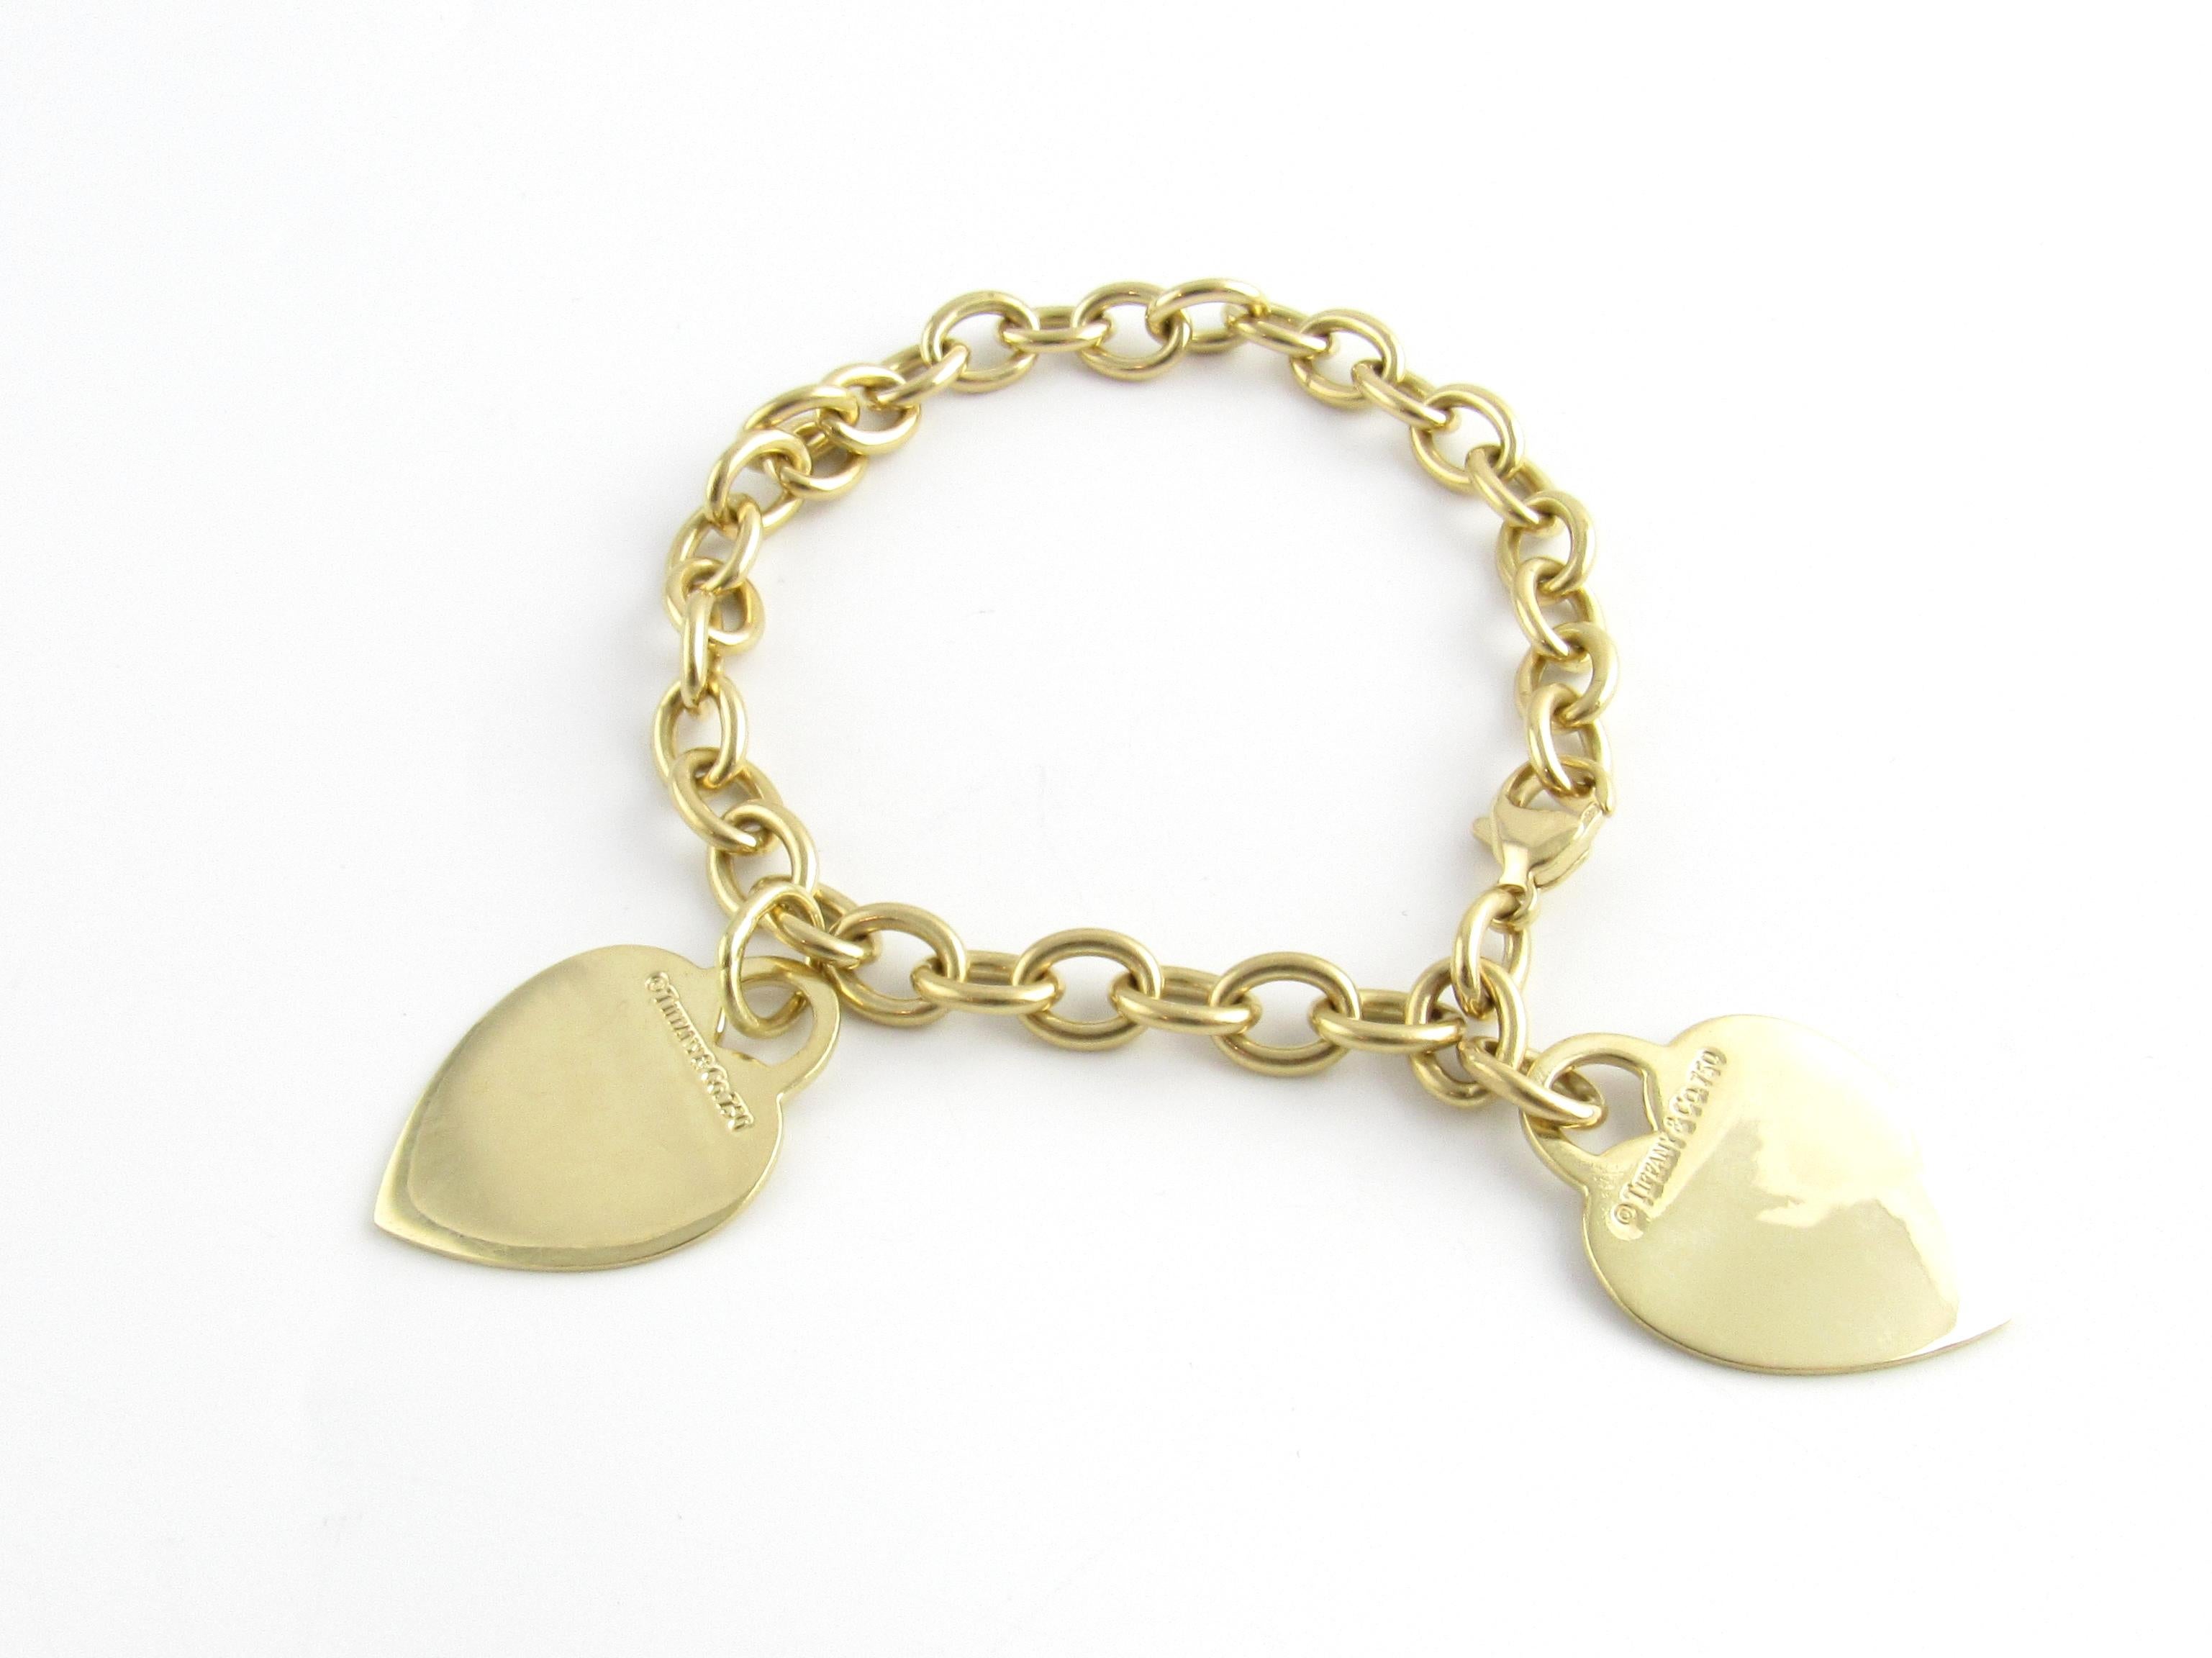 Tiffany & Co. 18K Yellow Gold Double Heart Tag Charm Bracelet

This authentic Tiffany & Co. 18K Yellow Gold Charm Bracelet is approx 7.75